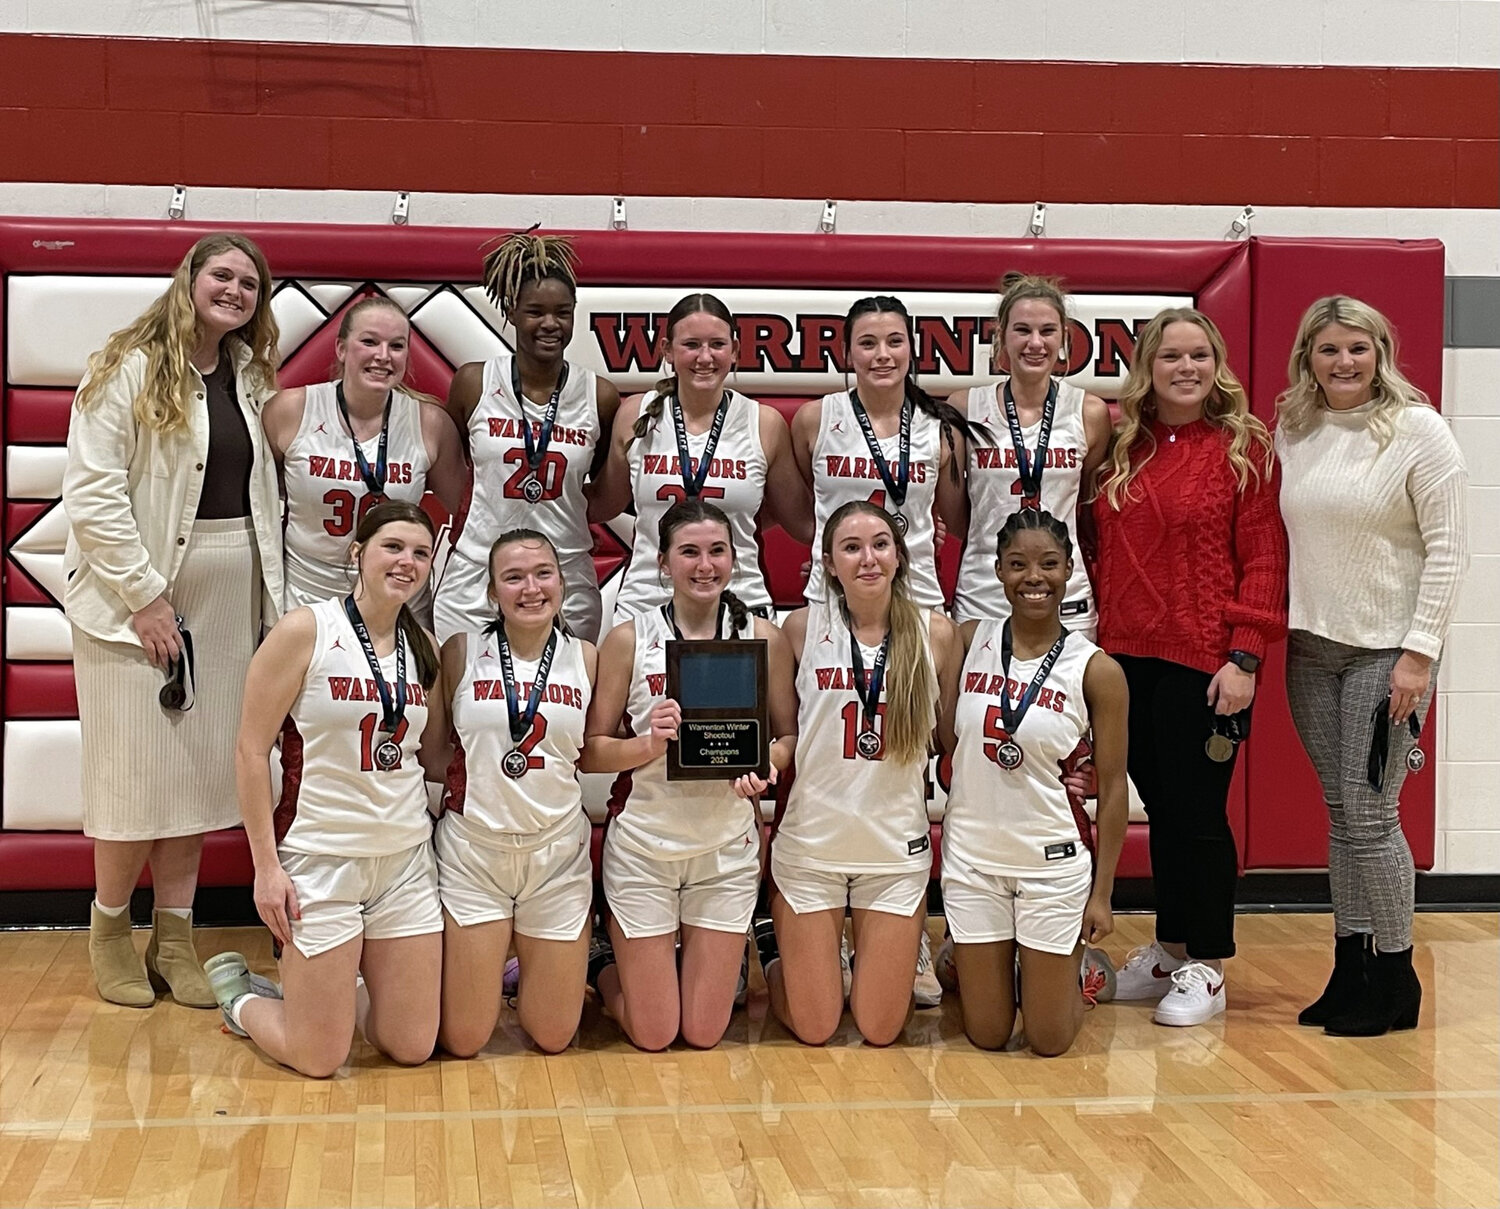 Members of the Warrenton girls basketball team pose with the championship plaque after winning the 2024 Warrenton Winter Shootout.